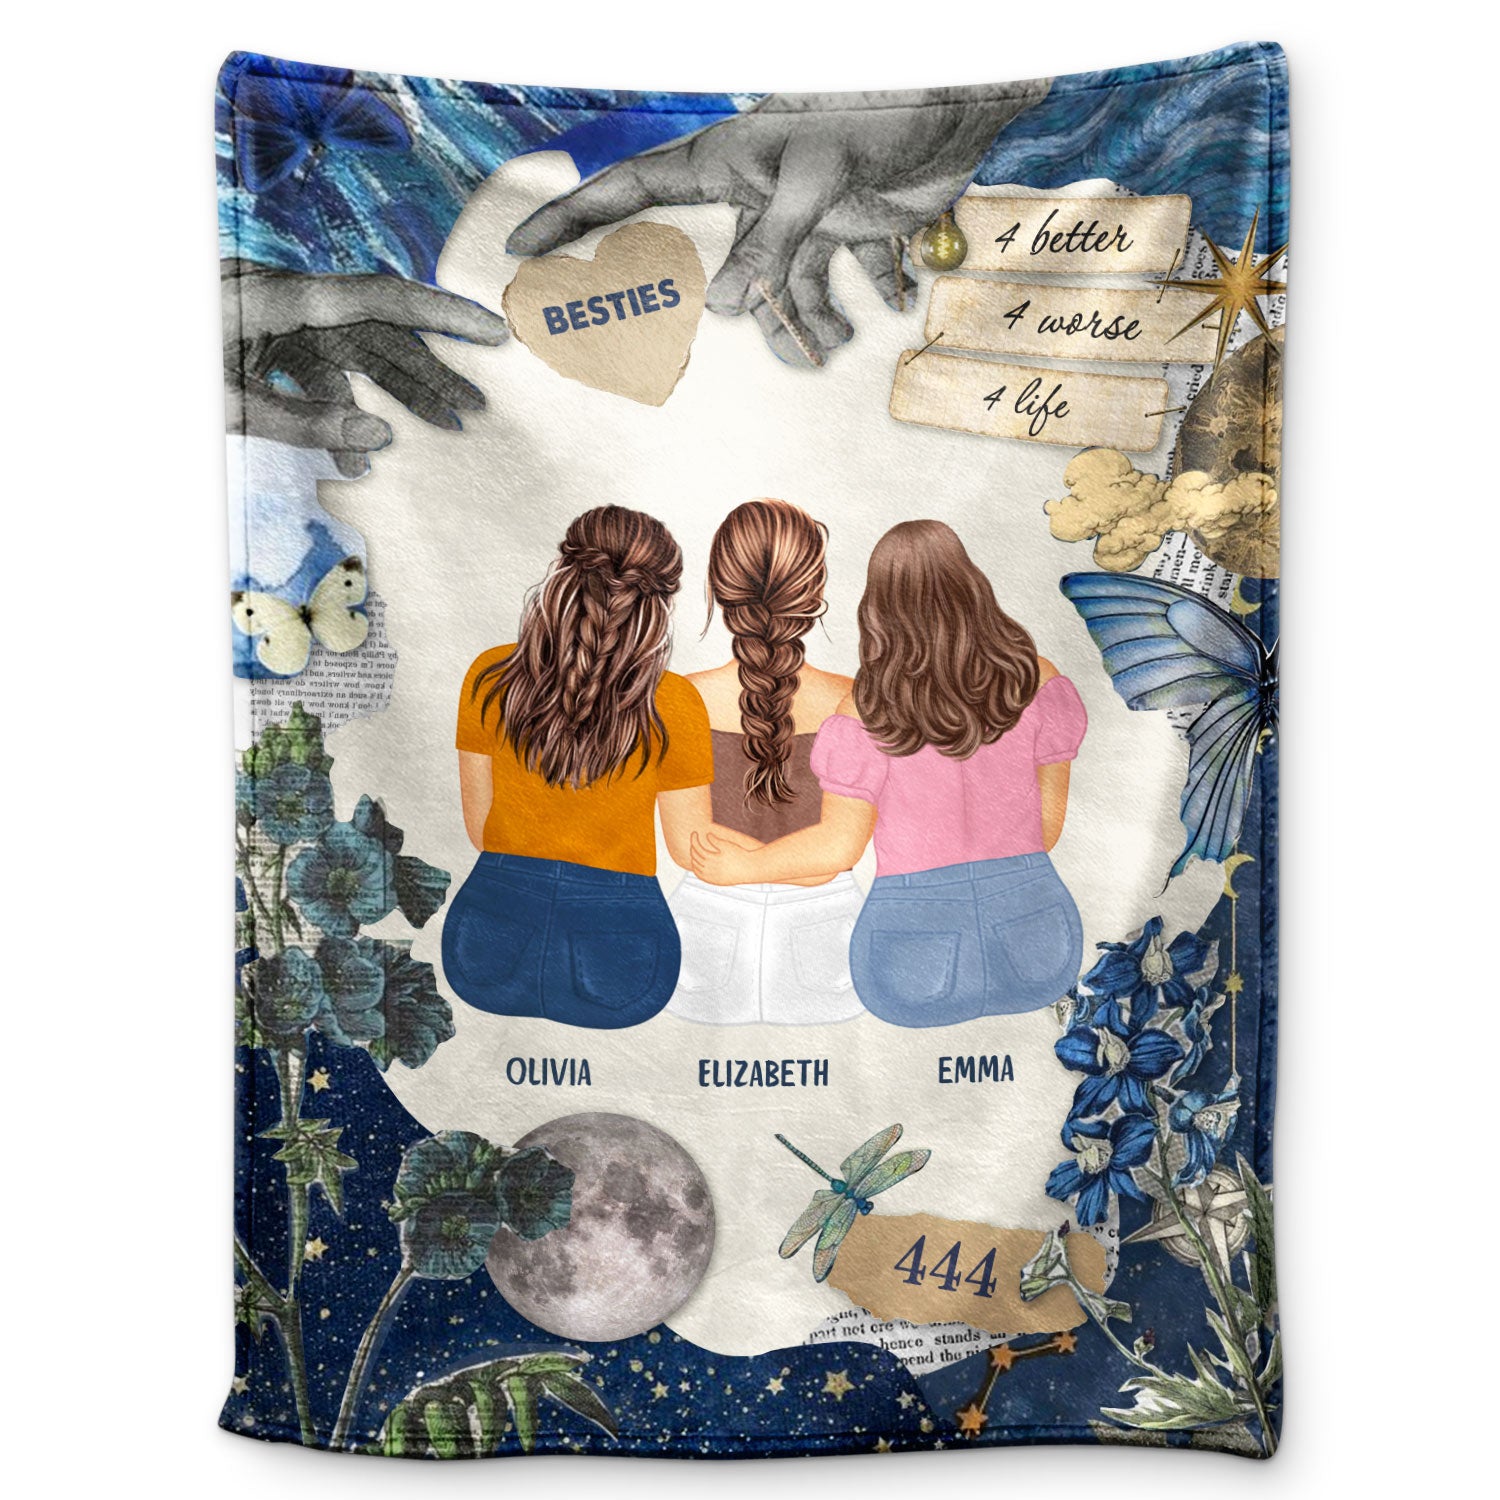 4 Better 4 Worse 4 Life - Gift For Sisters And Best Friends - Personalized Fleece Blanket